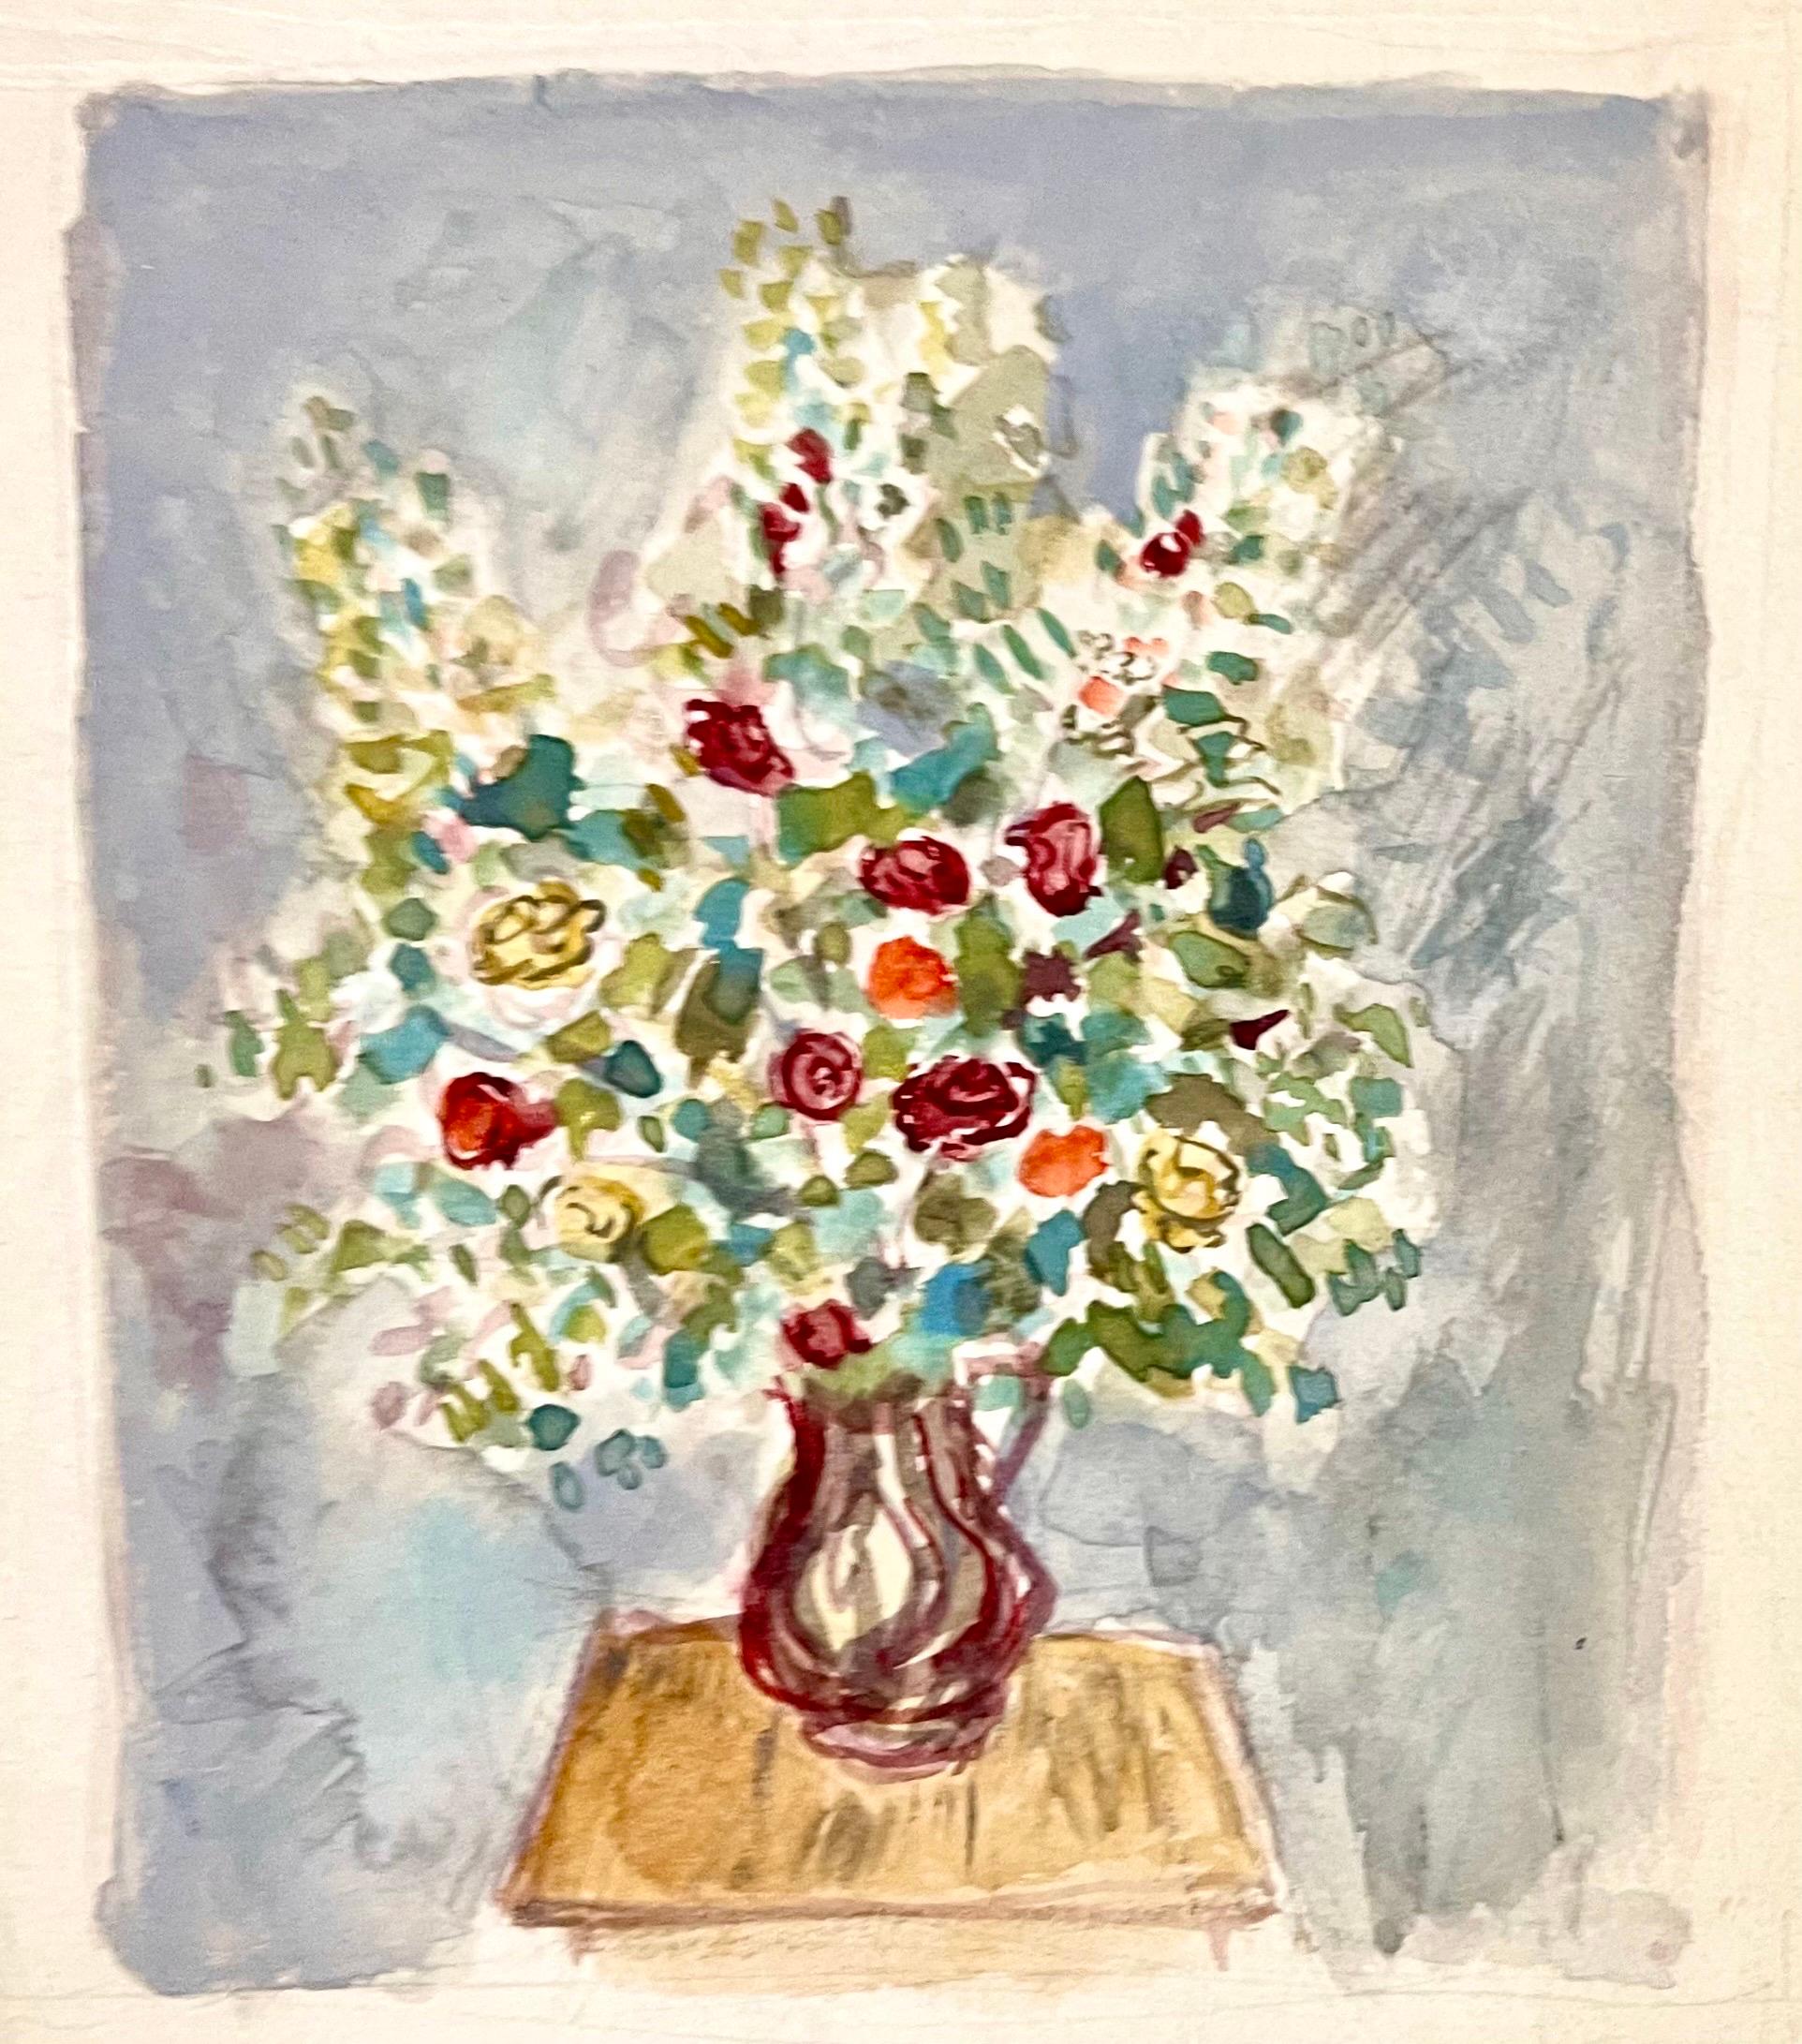 Simka Simkhovitch (Russian/American 1893 - 1949) 
This came with a small grouping from the artist's family, some were hand signed some were not.
These were studies for larger paintings.
This is a miniature watercolor and gouache vibrant, colorful